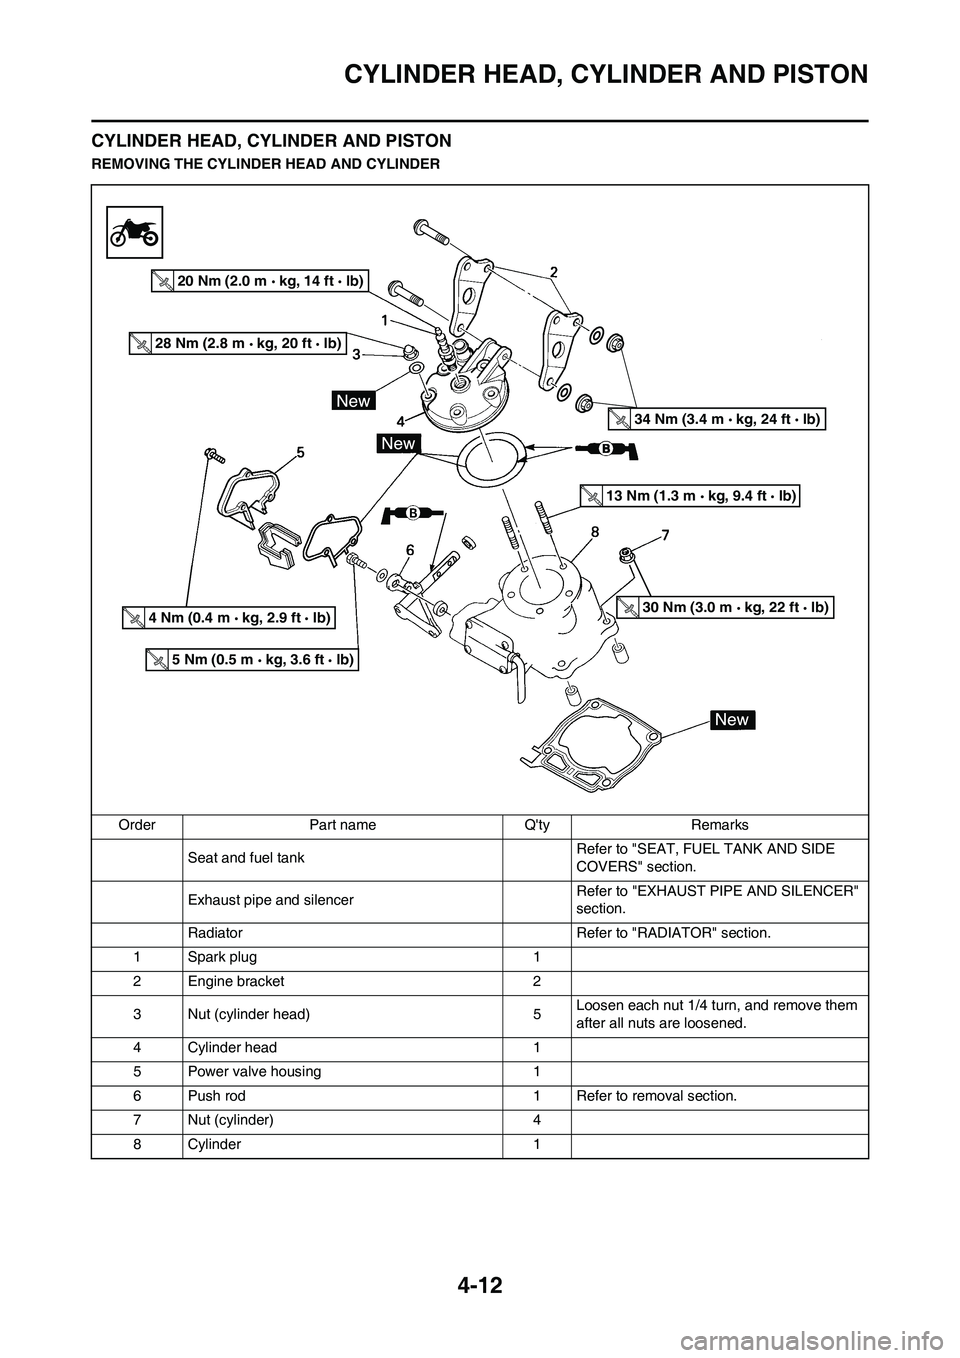 YAMAHA YZ125LC 2010 Owners Guide 4-12
CYLINDER HEAD, CYLINDER AND PISTON
CYLINDER HEAD, CYLINDER AND PISTON
REMOVING THE CYLINDER HEAD AND CYLINDER
Order Part name Qty Remarks
Seat and fuel tank Refer to "SEAT, FUEL TANK AND SIDE 
C